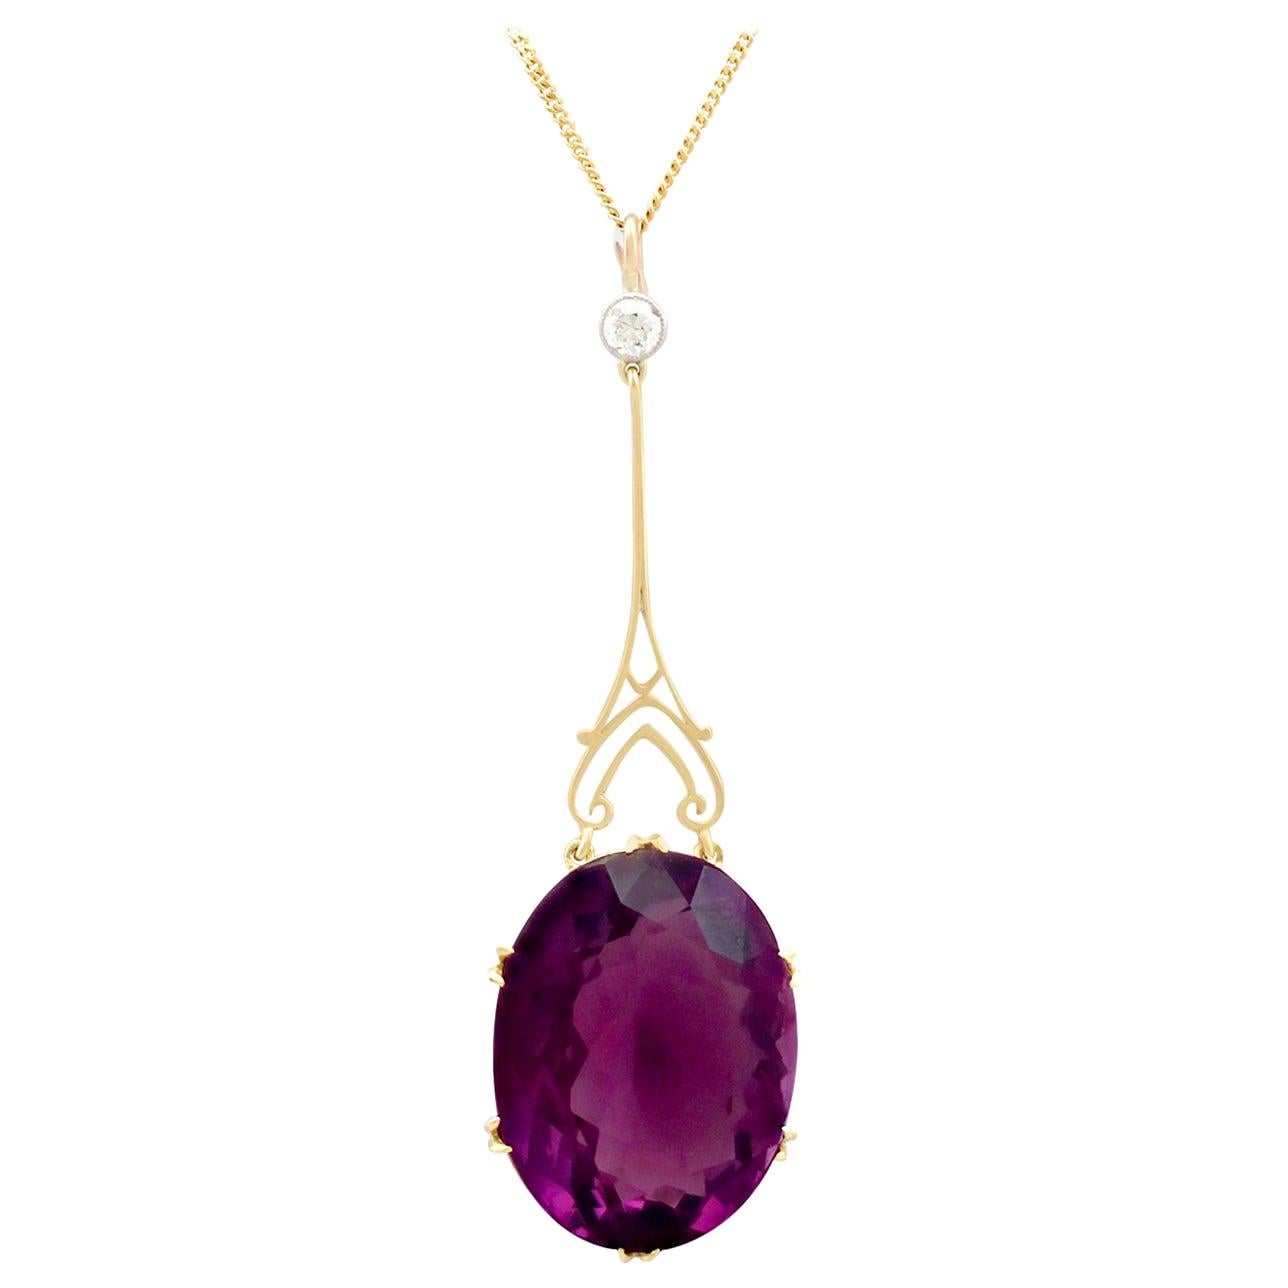 Antique Victorian 1890s 24.63 Carat Amethyst and Yellow Gold Pendant